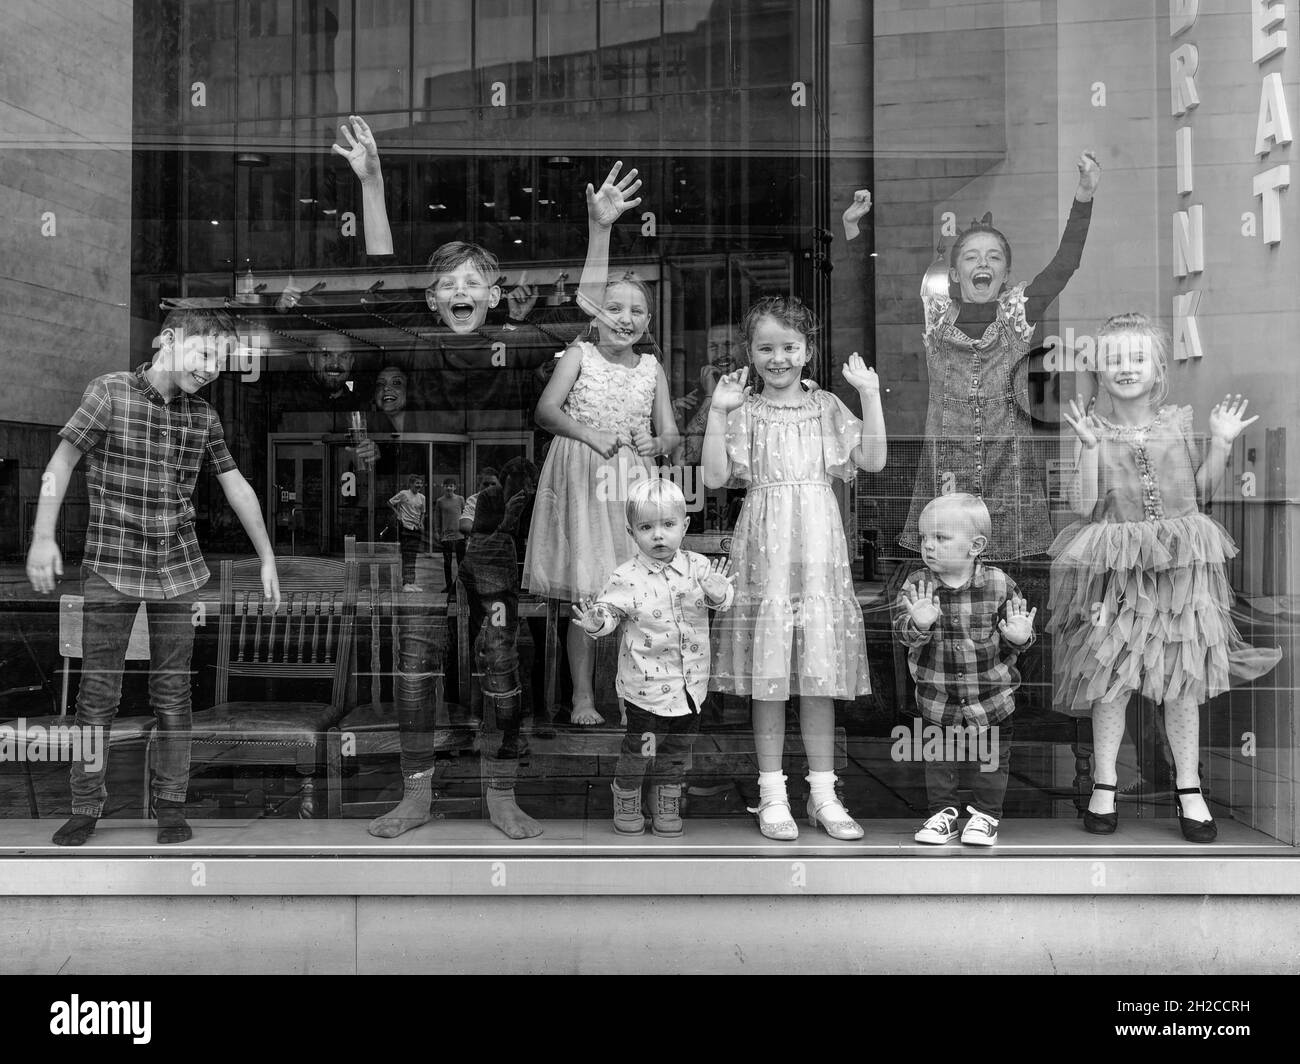 London, Greater London, England, October 09 2021: A group of children behind a window smile, wave and one does a robot dance. Monochrome image. Stock Photo